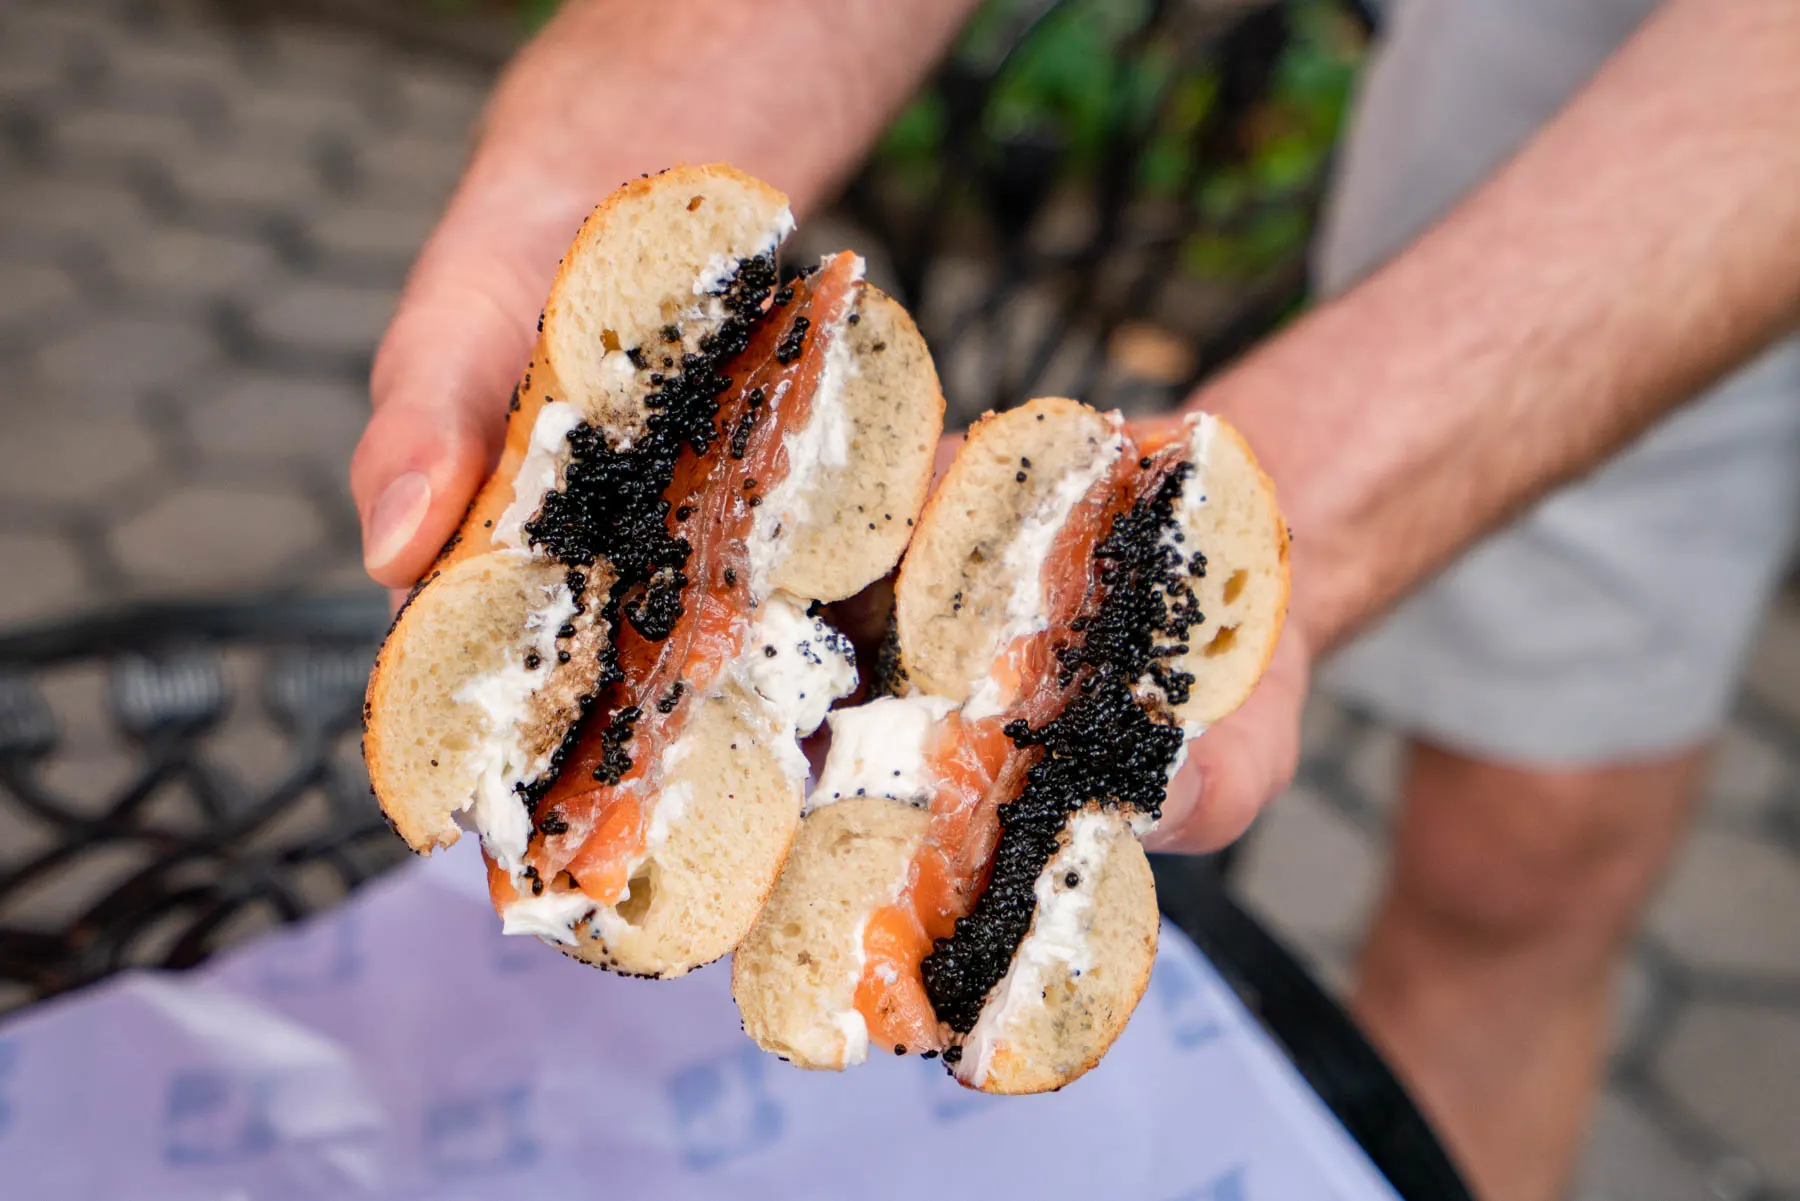 best bagel and lox in New York City
Russ & Daughters salmon bagel